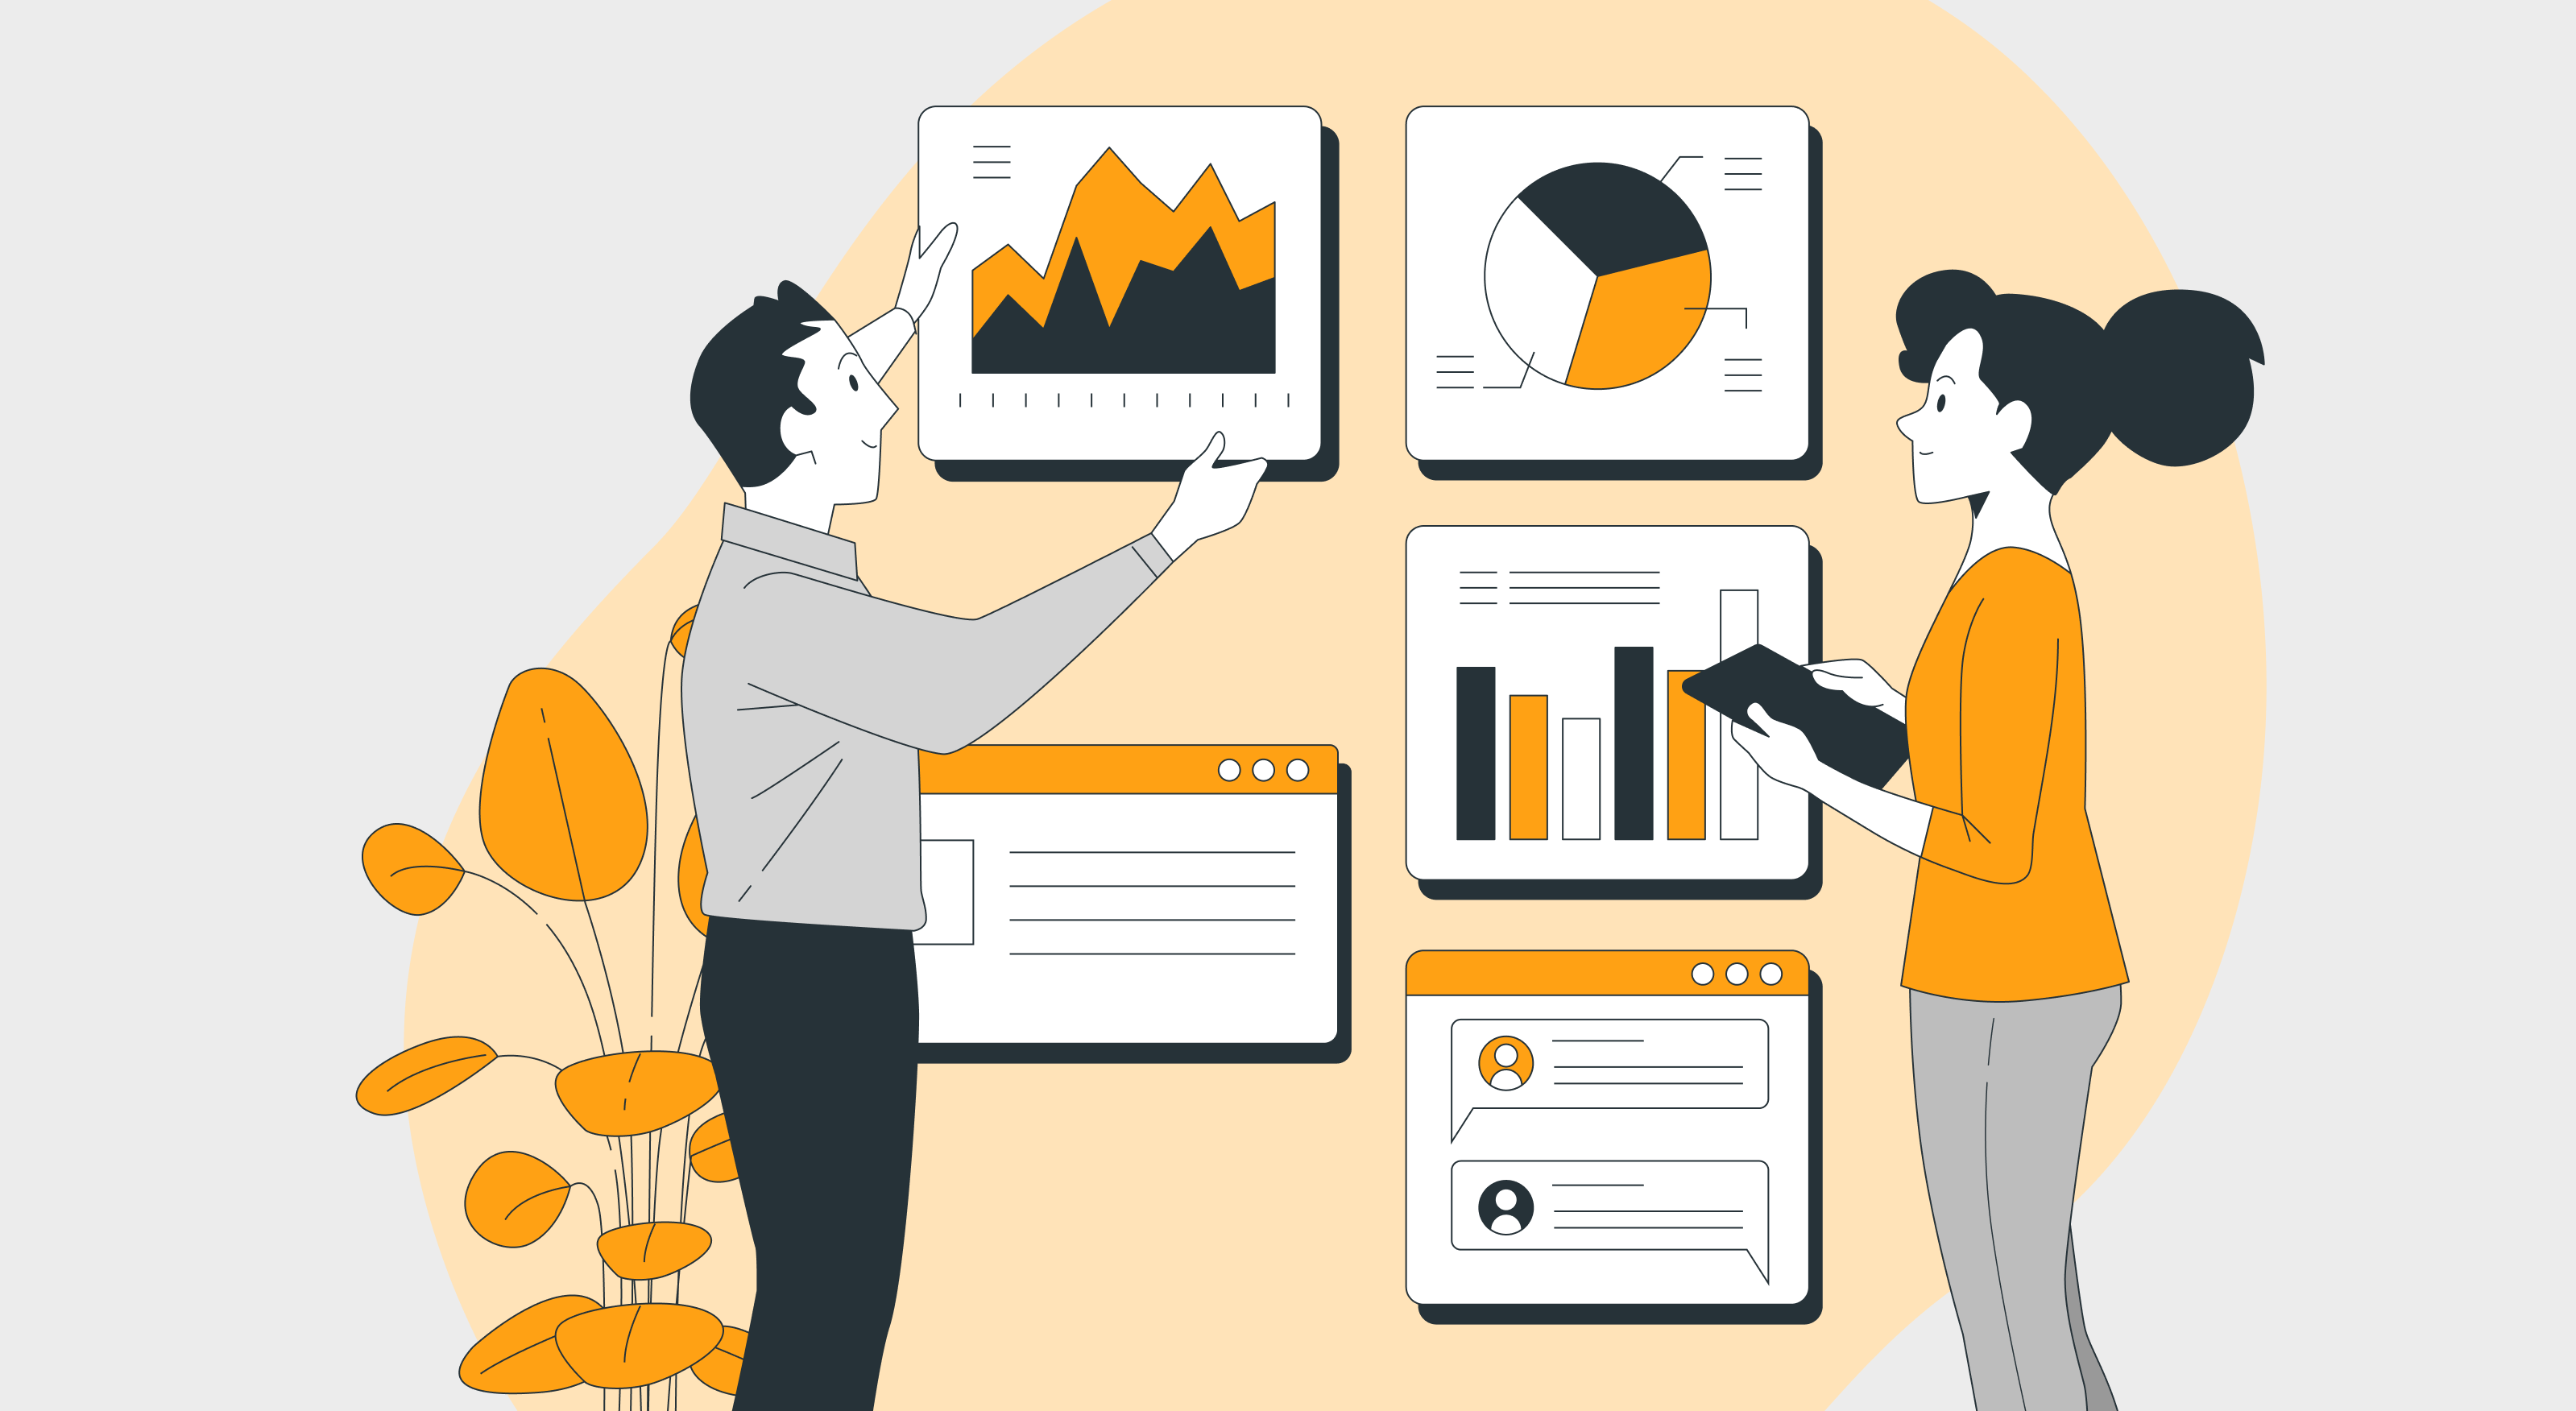 Illustration showing 2 data driven business people presiding over various depictions of data such as pie and bar charts.